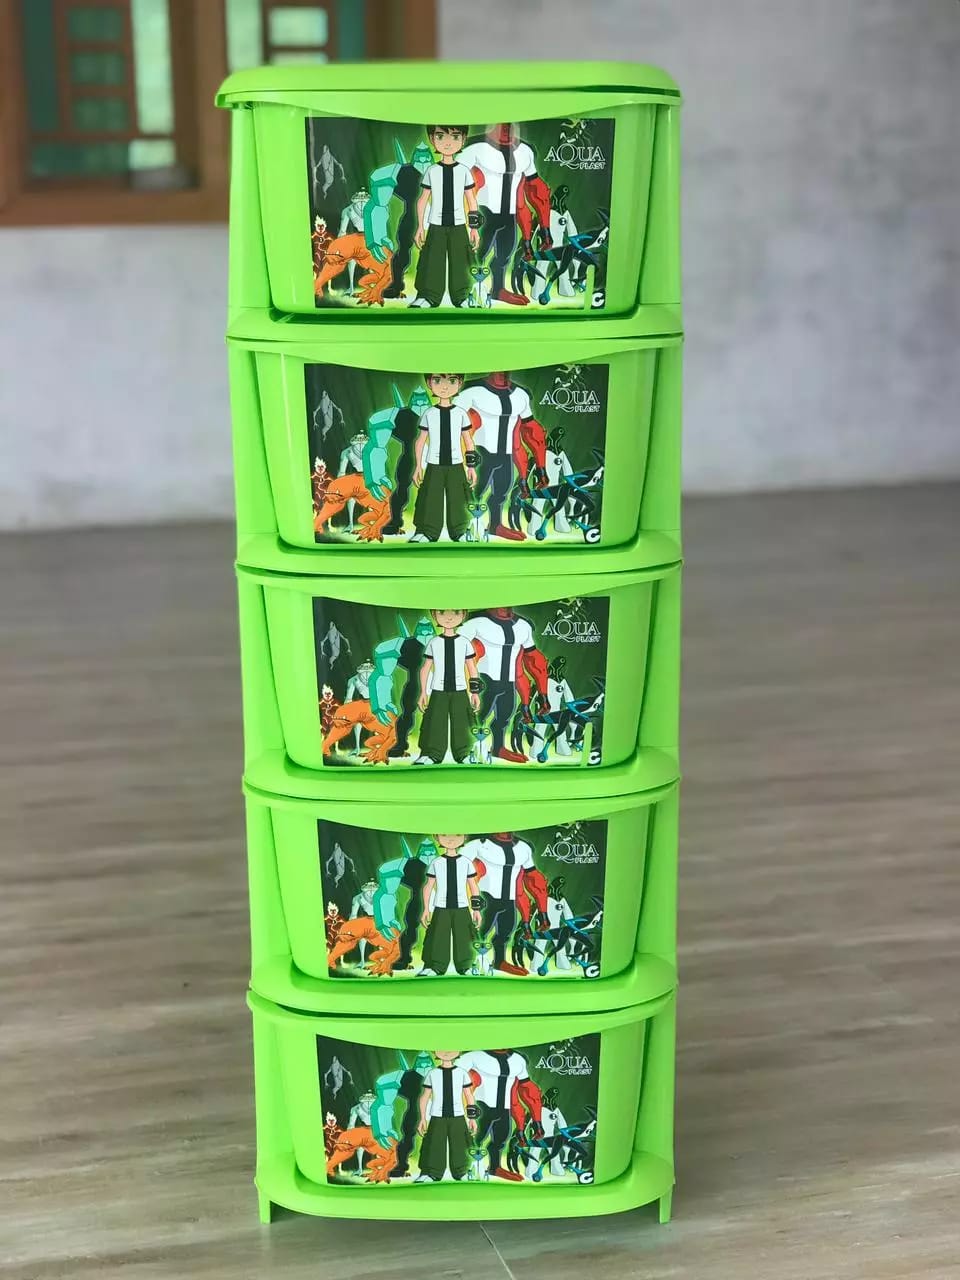 Portable Ben 10 Cartoon Character Plastic Drawers – 5 Drawer - Kids Toy Accessory - Box & Multi Functional Storage Unit Desktop Room Draws - Portion Cabinet Rack - Multi Layer Space Printed Drawer Decorative Design For Girls & Boys